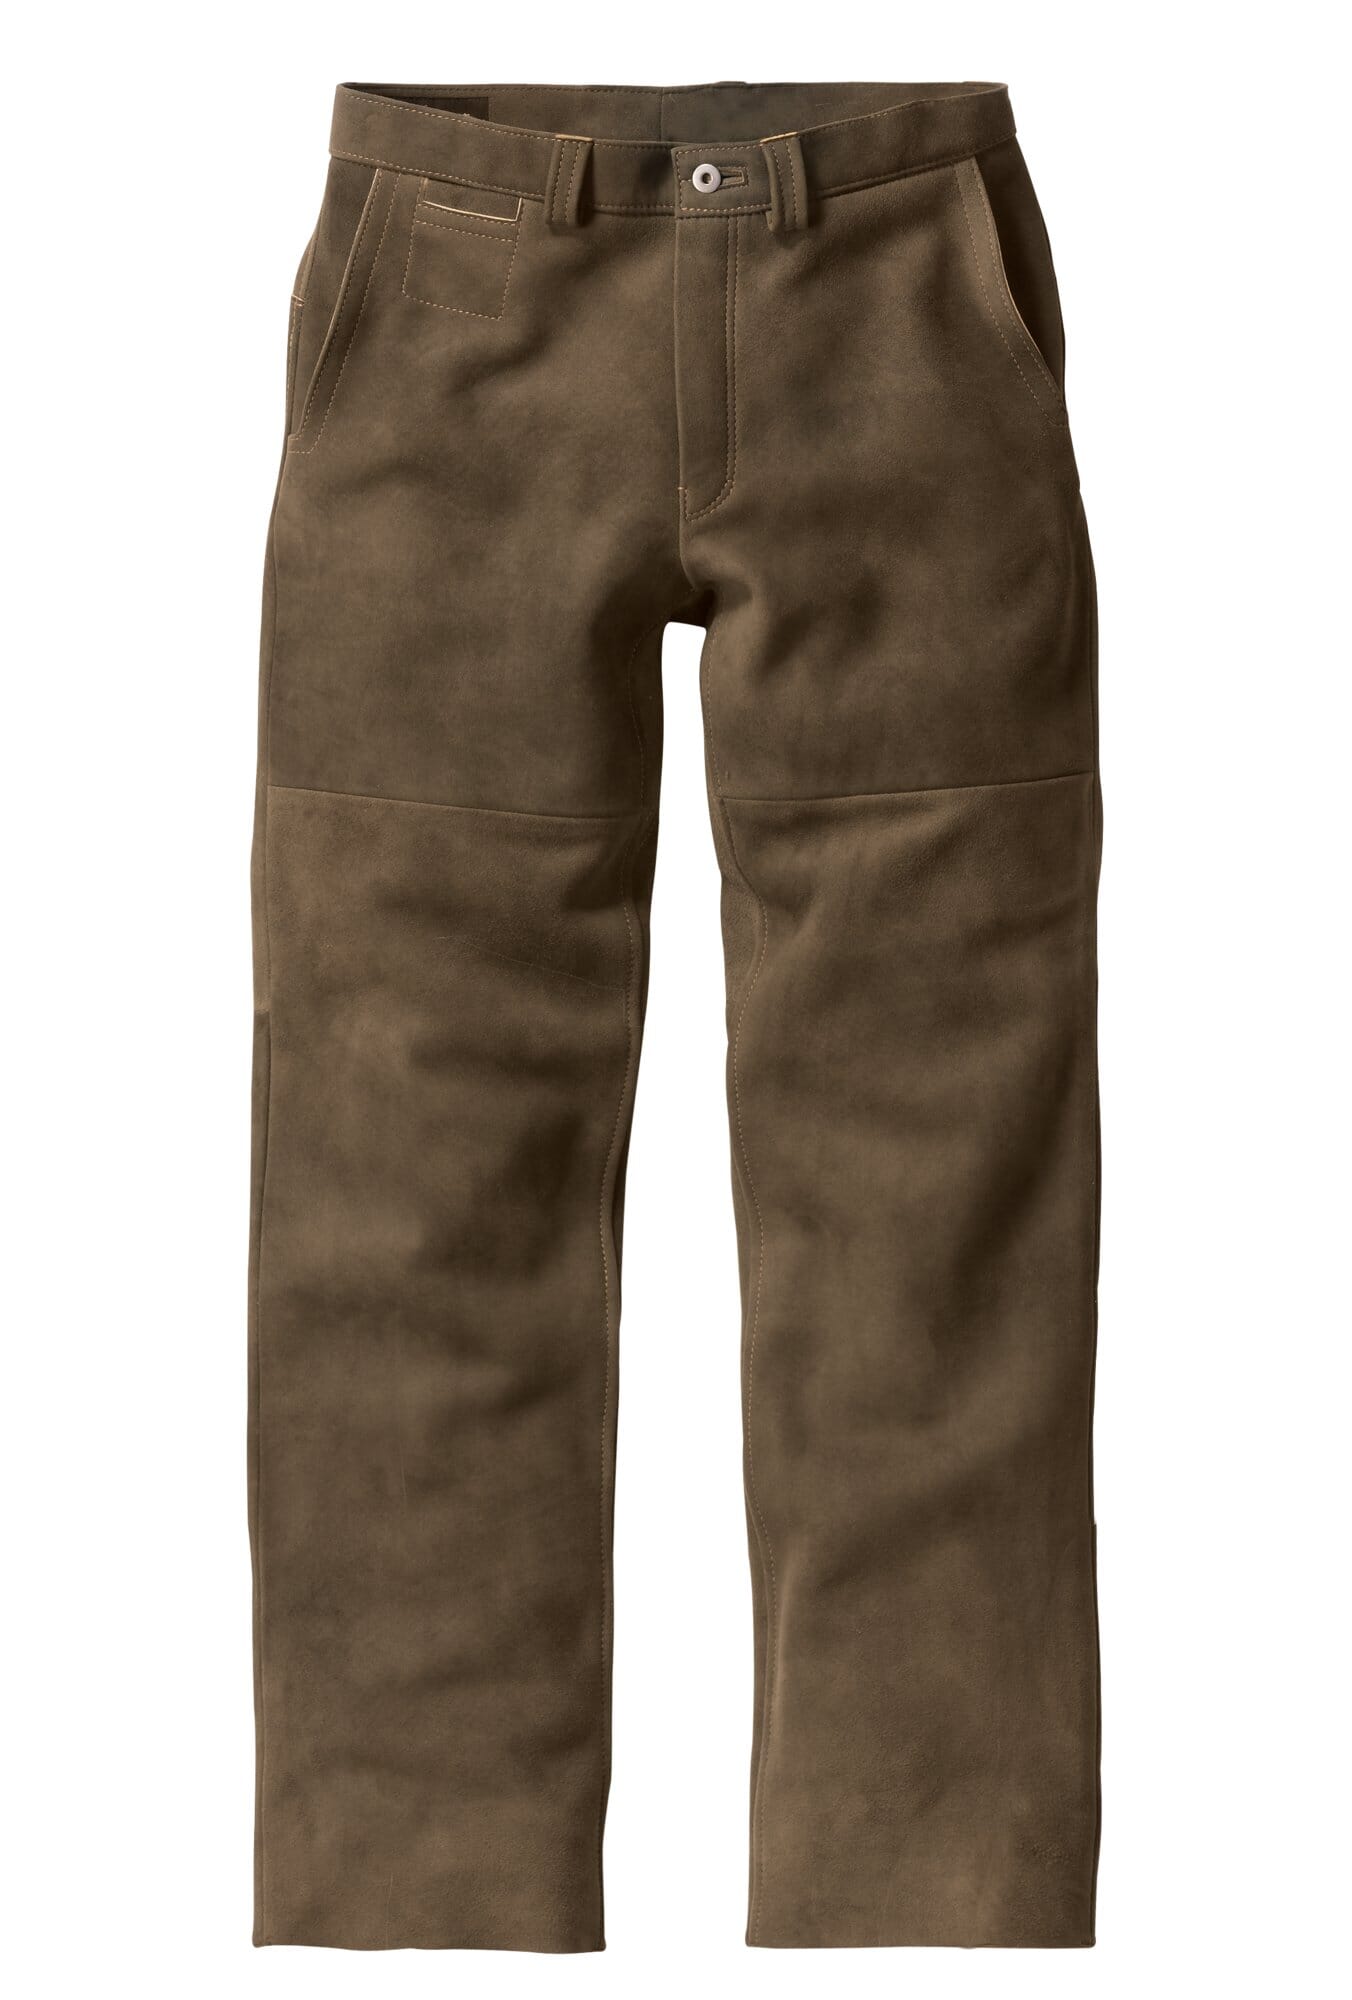 Deerskin trousers old tanned, Olive